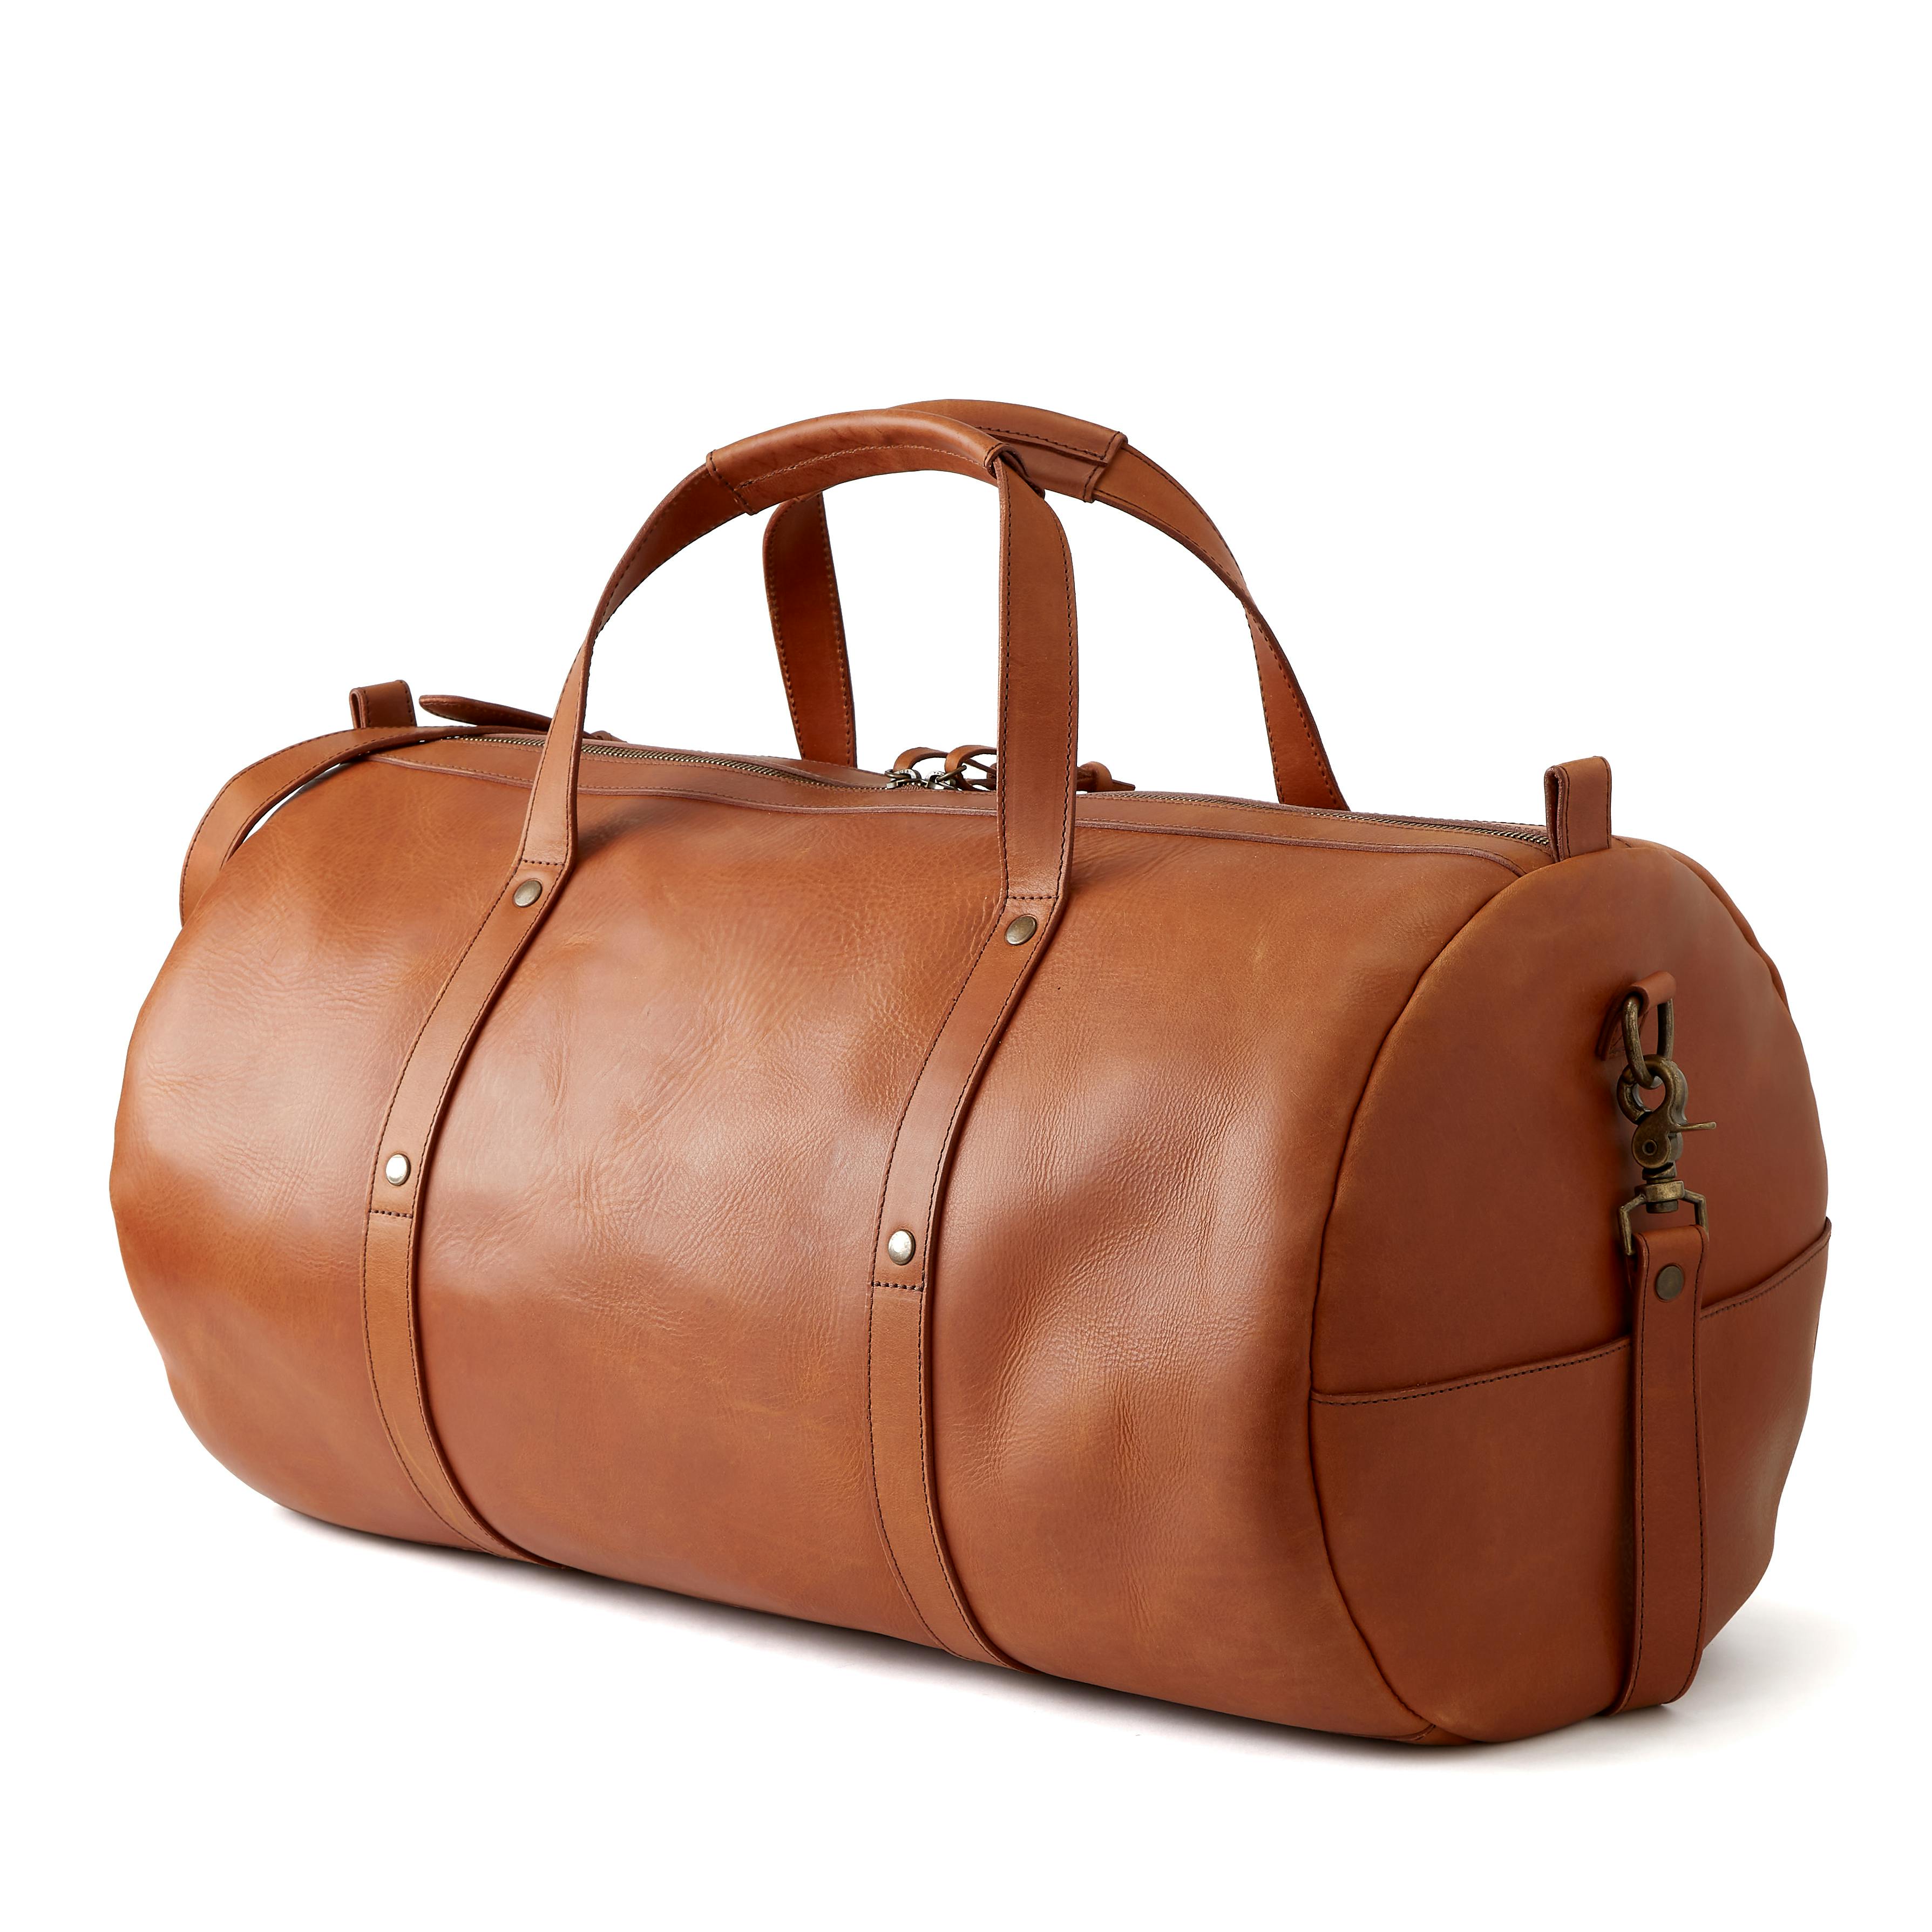 Yellowstone Leather 21-Inch Burnished Gold Duffle Bag, Brown